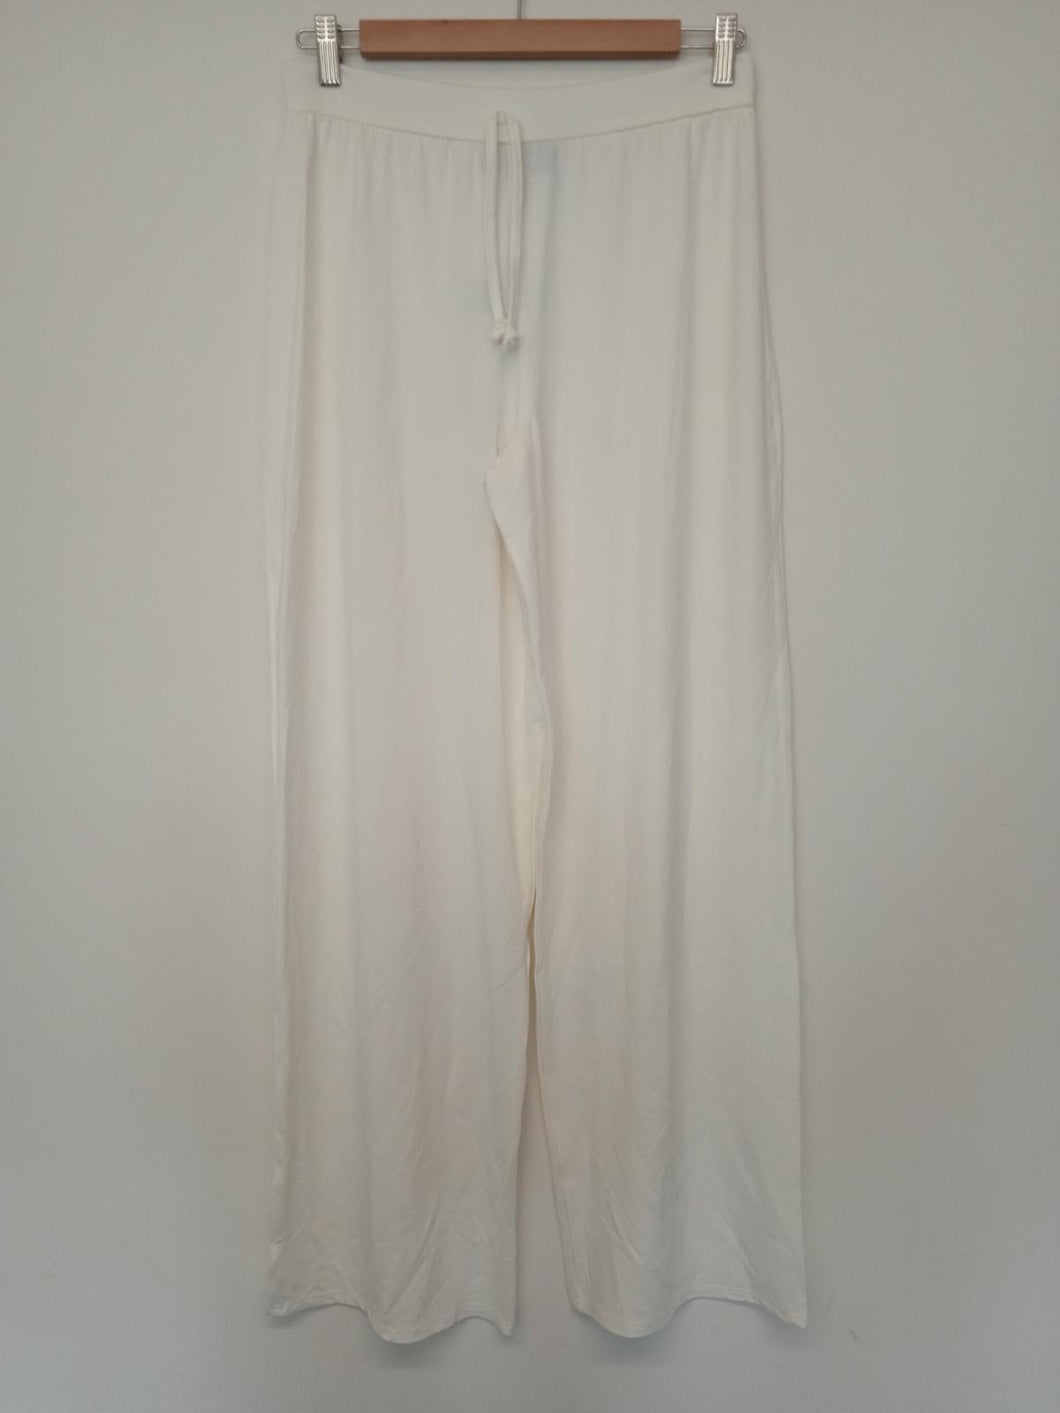 KAREN MILLEN Ladies Ivory Wide-Leg Stretch Casual Lounge Trousers Size UK8 NEW